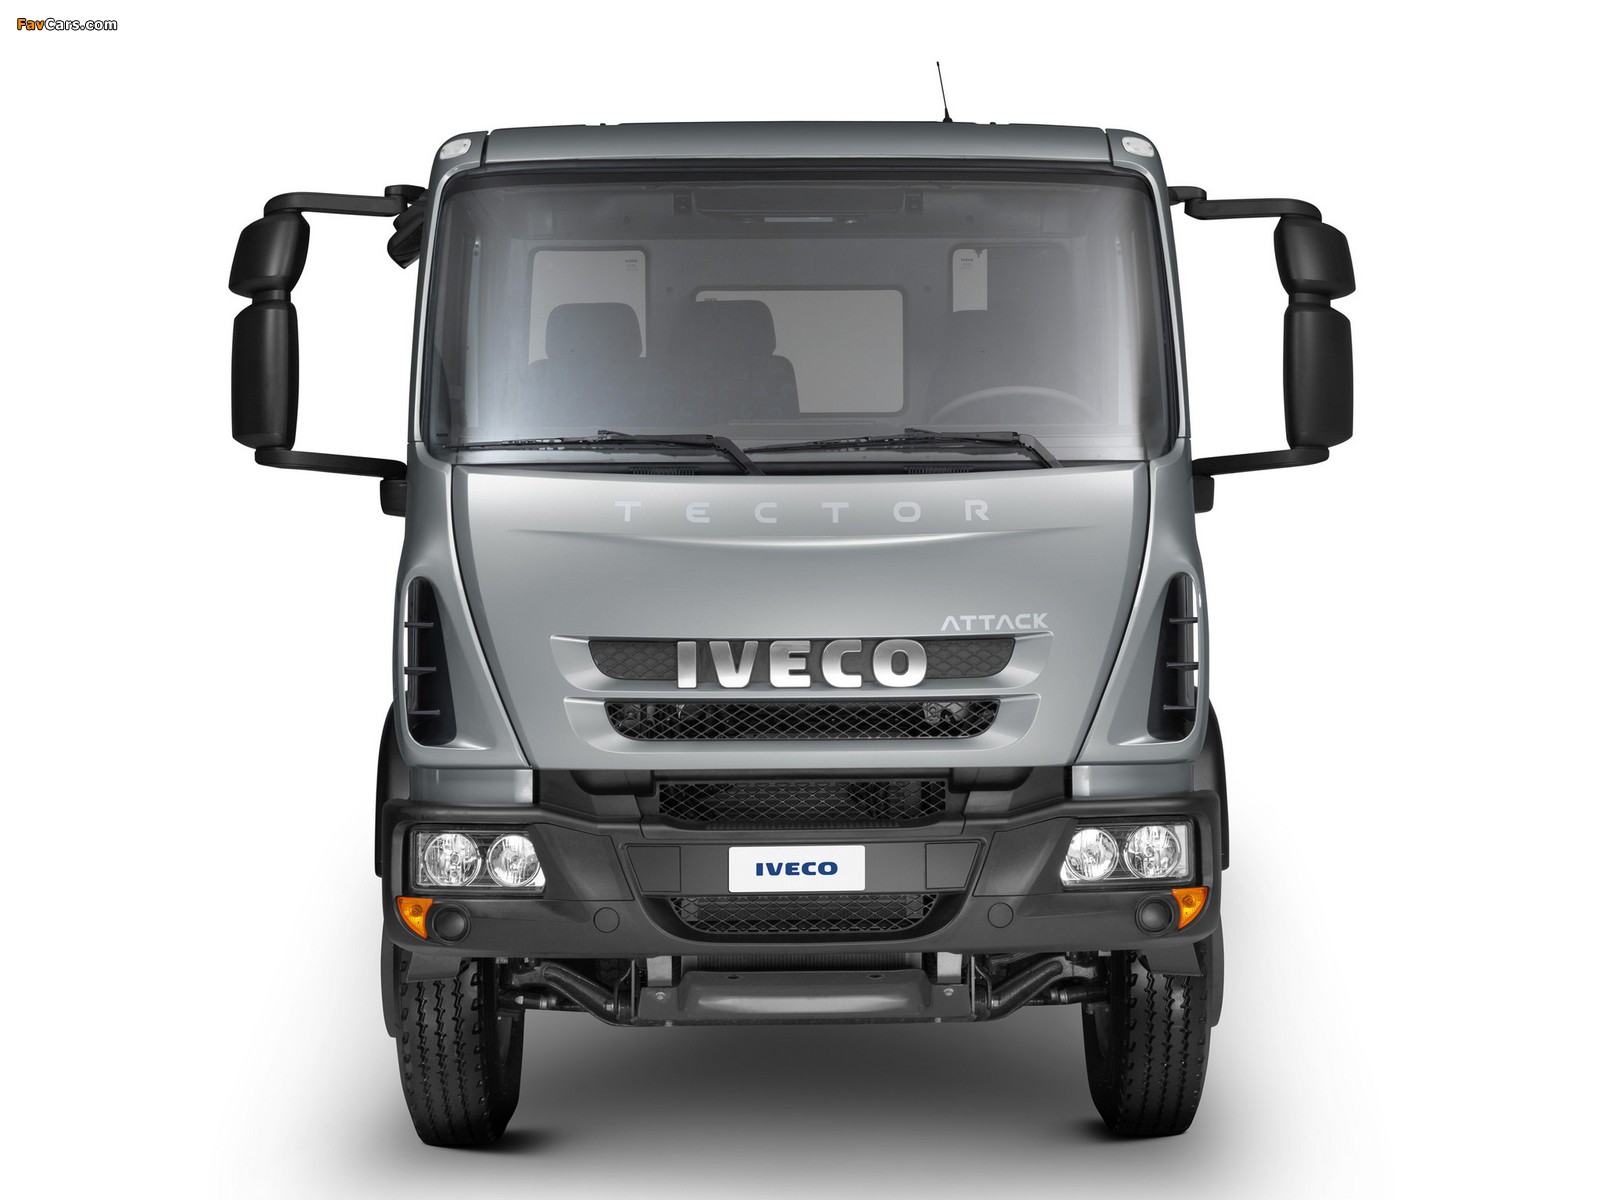 Iveco Tector Attack 4x2 2012 pictures (1600 x 1200)